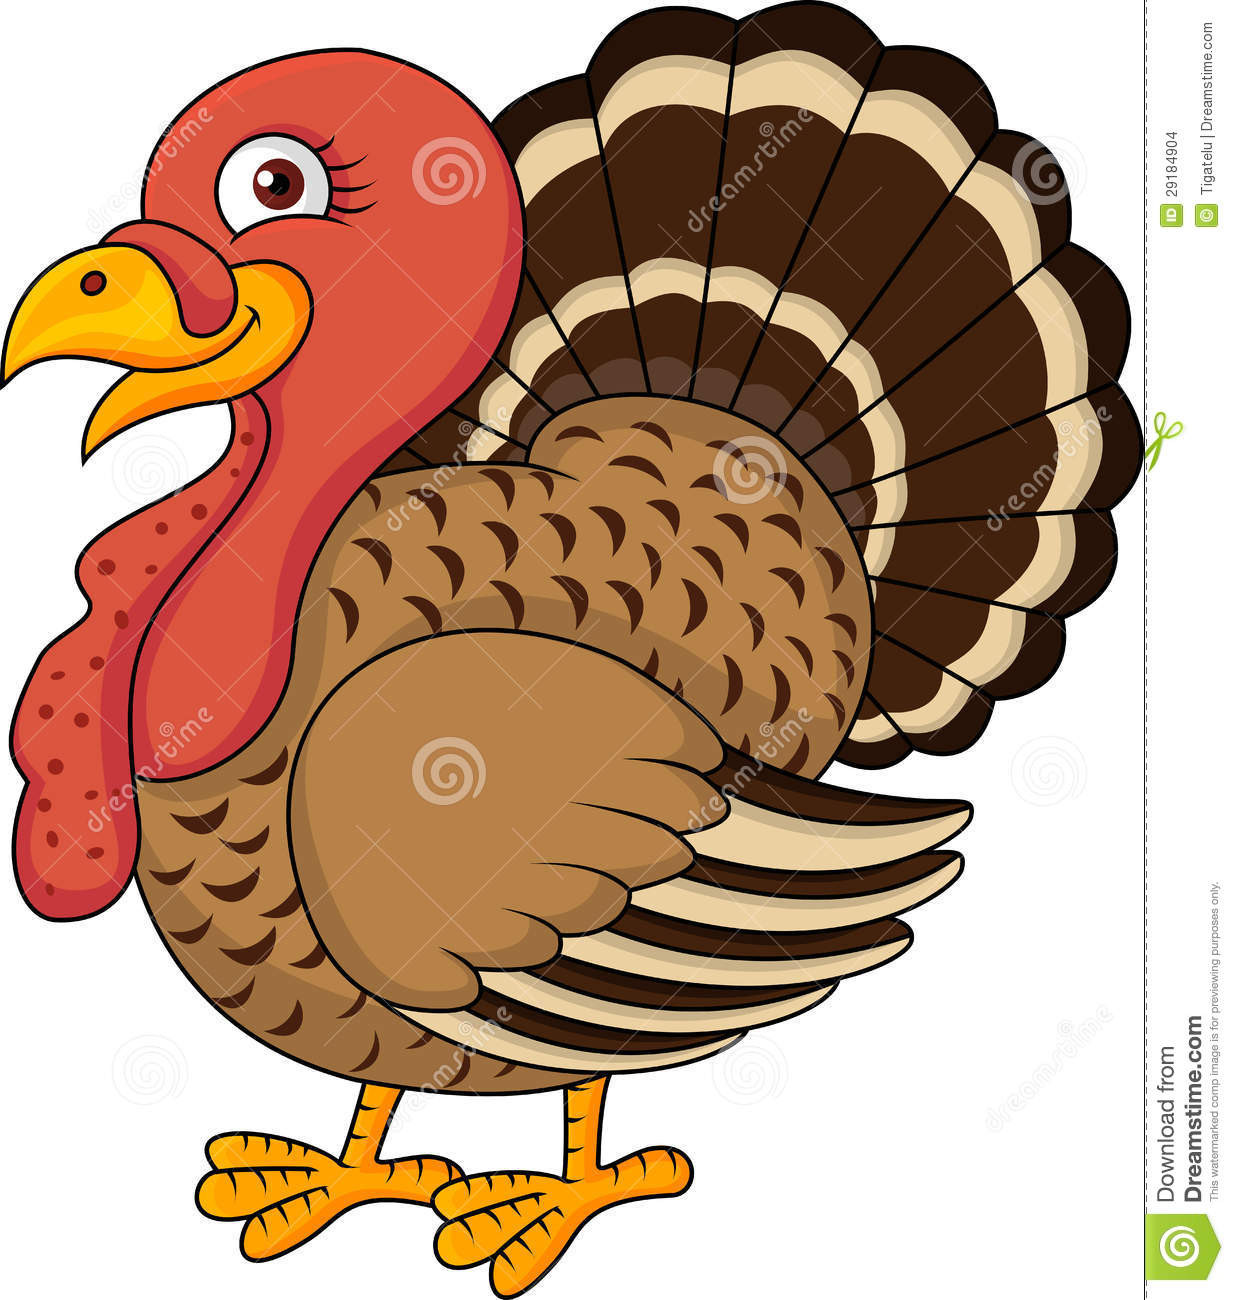 Cartoon Picture Of Turkey For Thanksgiving
 Turkey clipart ic Pencil and in color turkey clipart